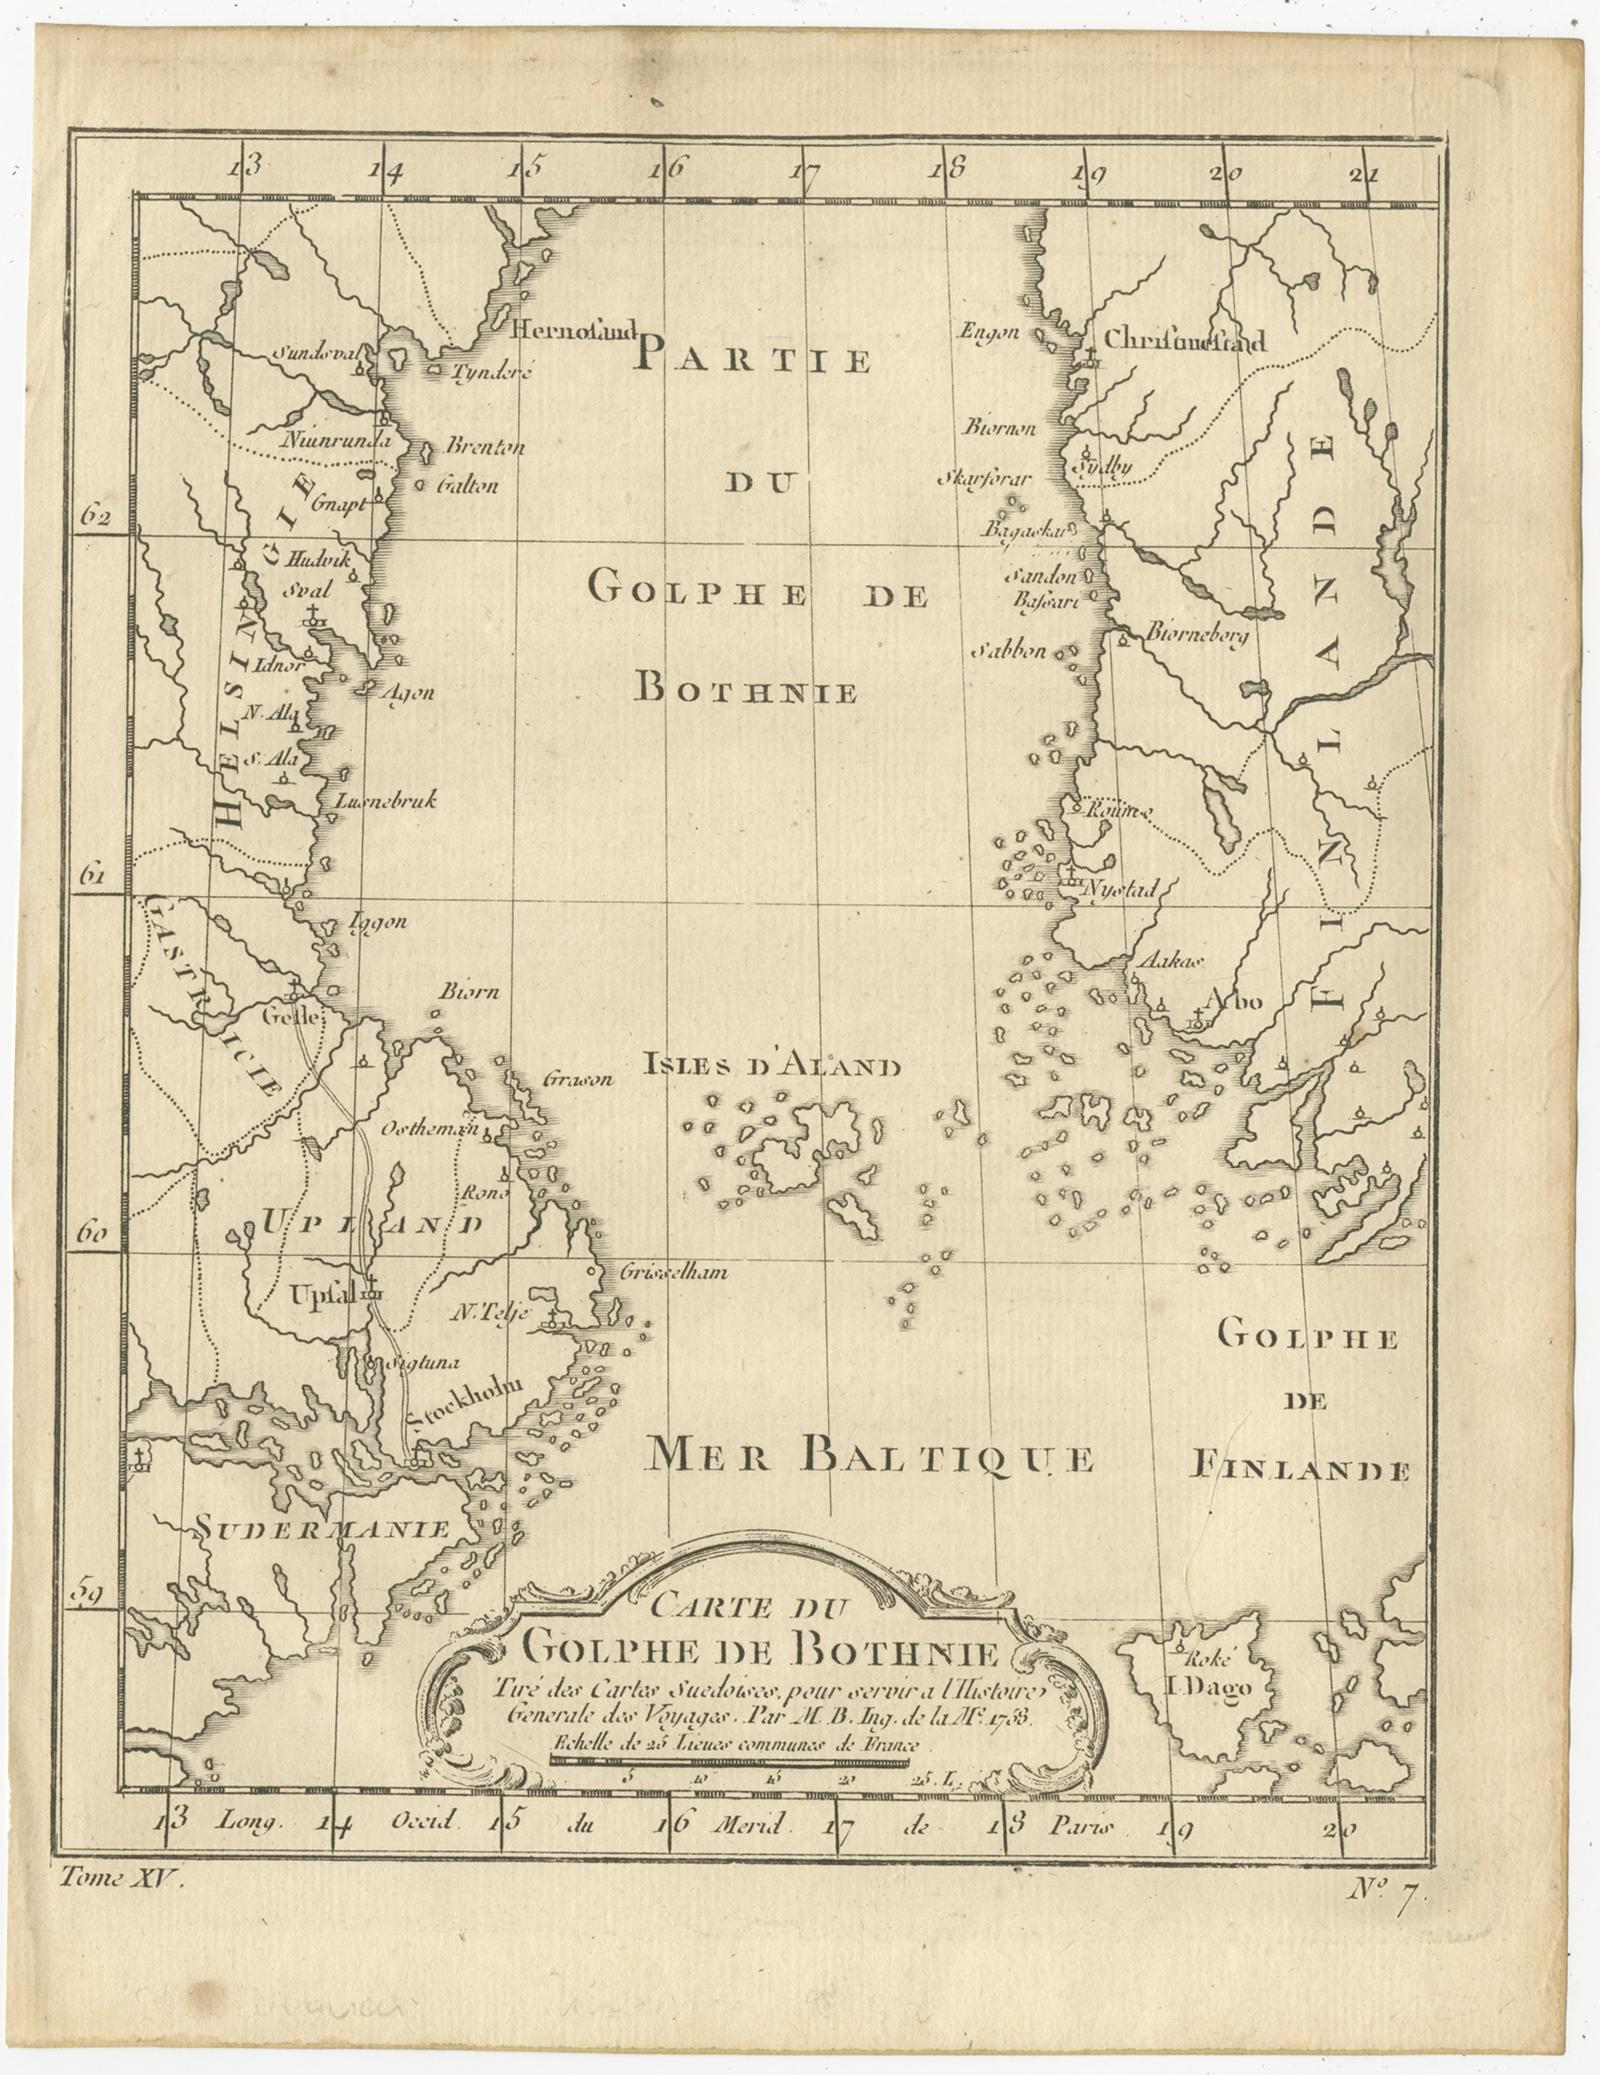 Antique map titled 'Carte du Golphe de Bothnie'. 

Original antique map of the Gulf of Bothnia, the northernmost arm of the Baltic Sea. It is situated between Finland's west coast (Ostrobothnia) and Sweden's east coast (Westrobothnia and North